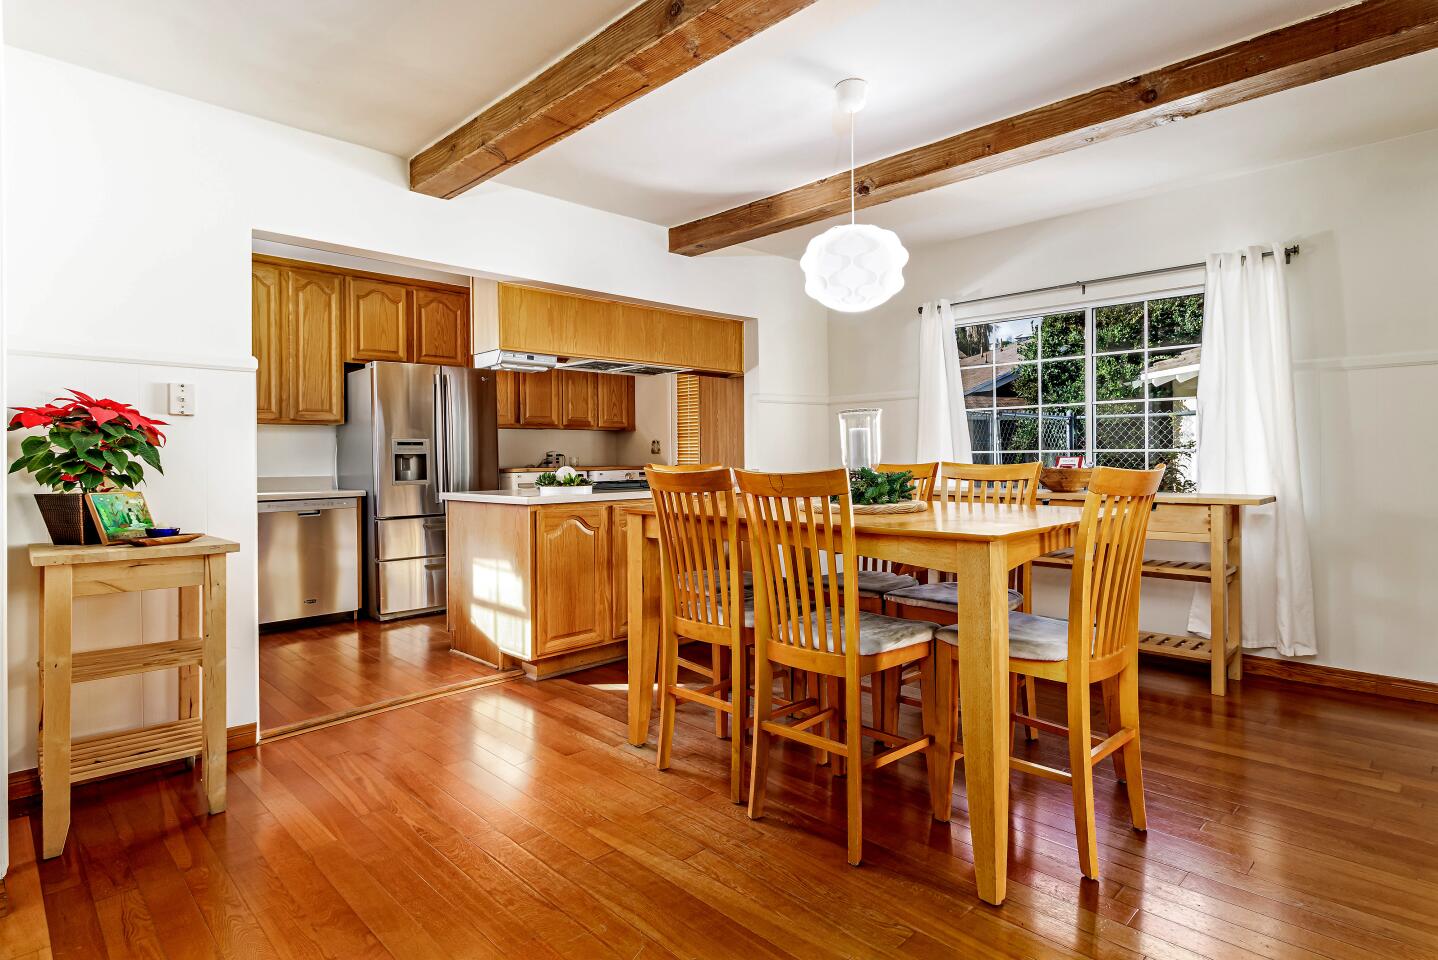 The $1.094-million home showcases sunny living spaces with wood floors.